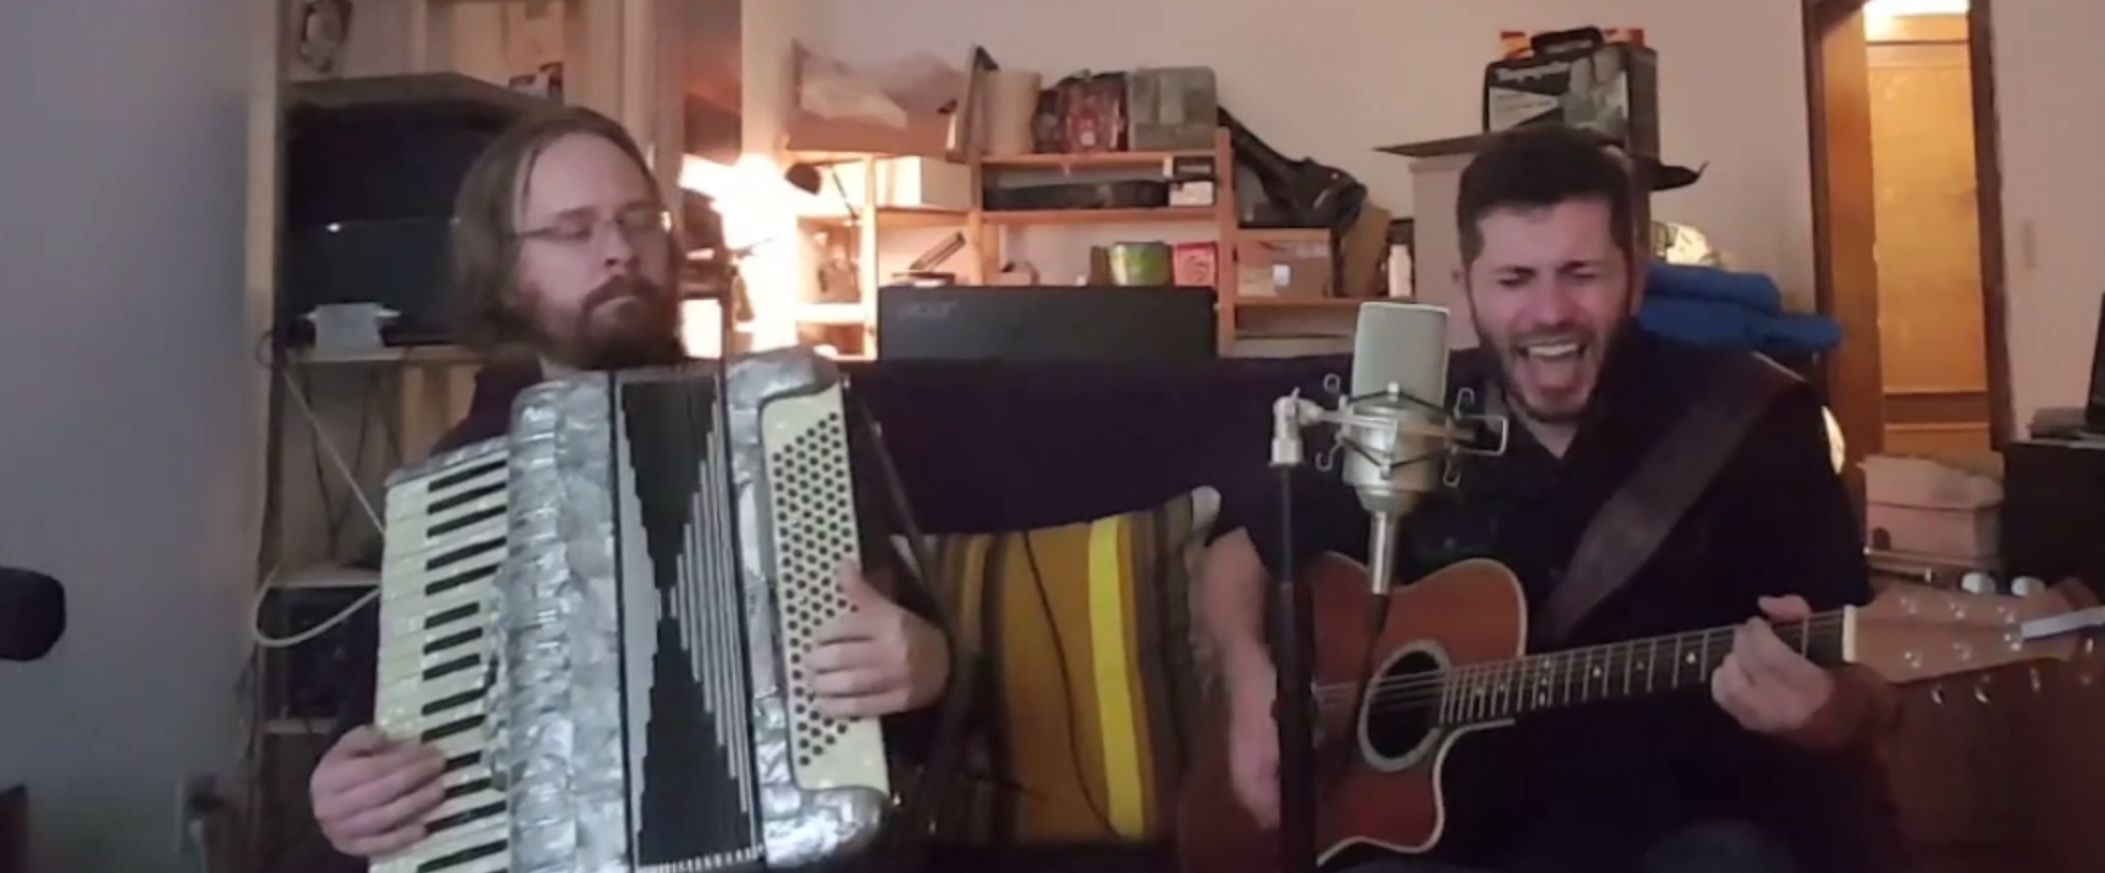 An image of Erik Ostrom and Bryce Kalal. Erik is a white man with medium-length brown hair, a beard, and glasses; Bryce is a white man with short dark brown hair and a beard. They're sitting beside each other, in front of a microphone in a messy apartment. Erik is playing a white and black accordion, while Bryce is singing and playing an acoustic guitar.